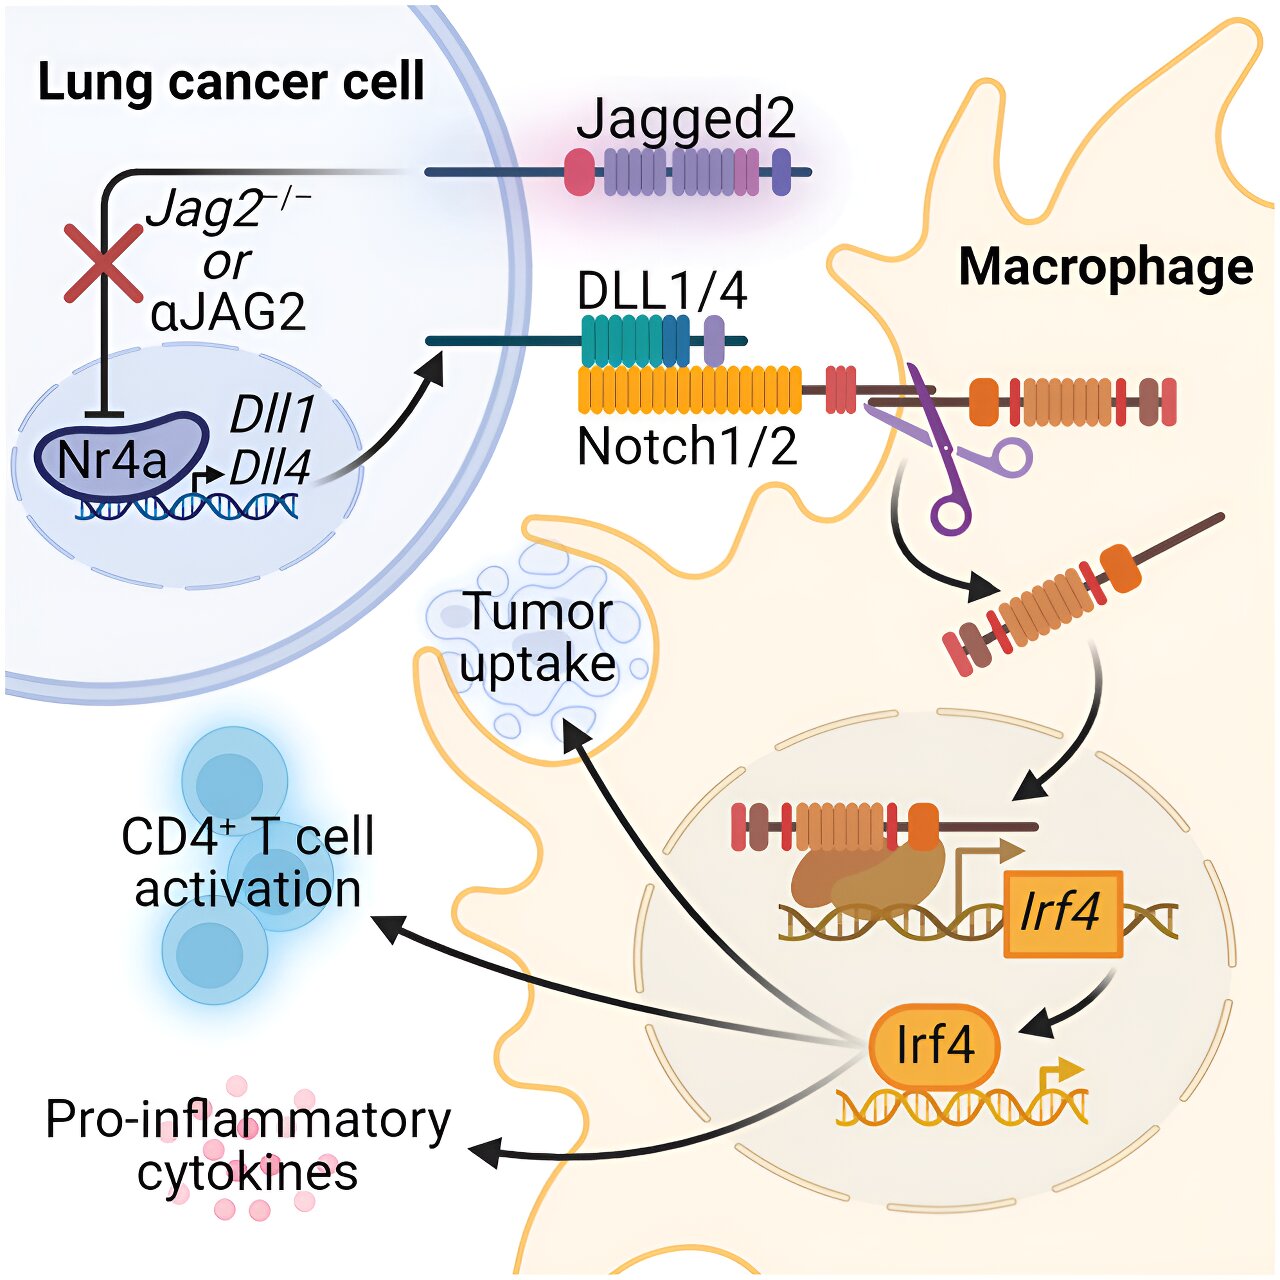 Researchers discover new therapeutic target for non-small cell lung cancer